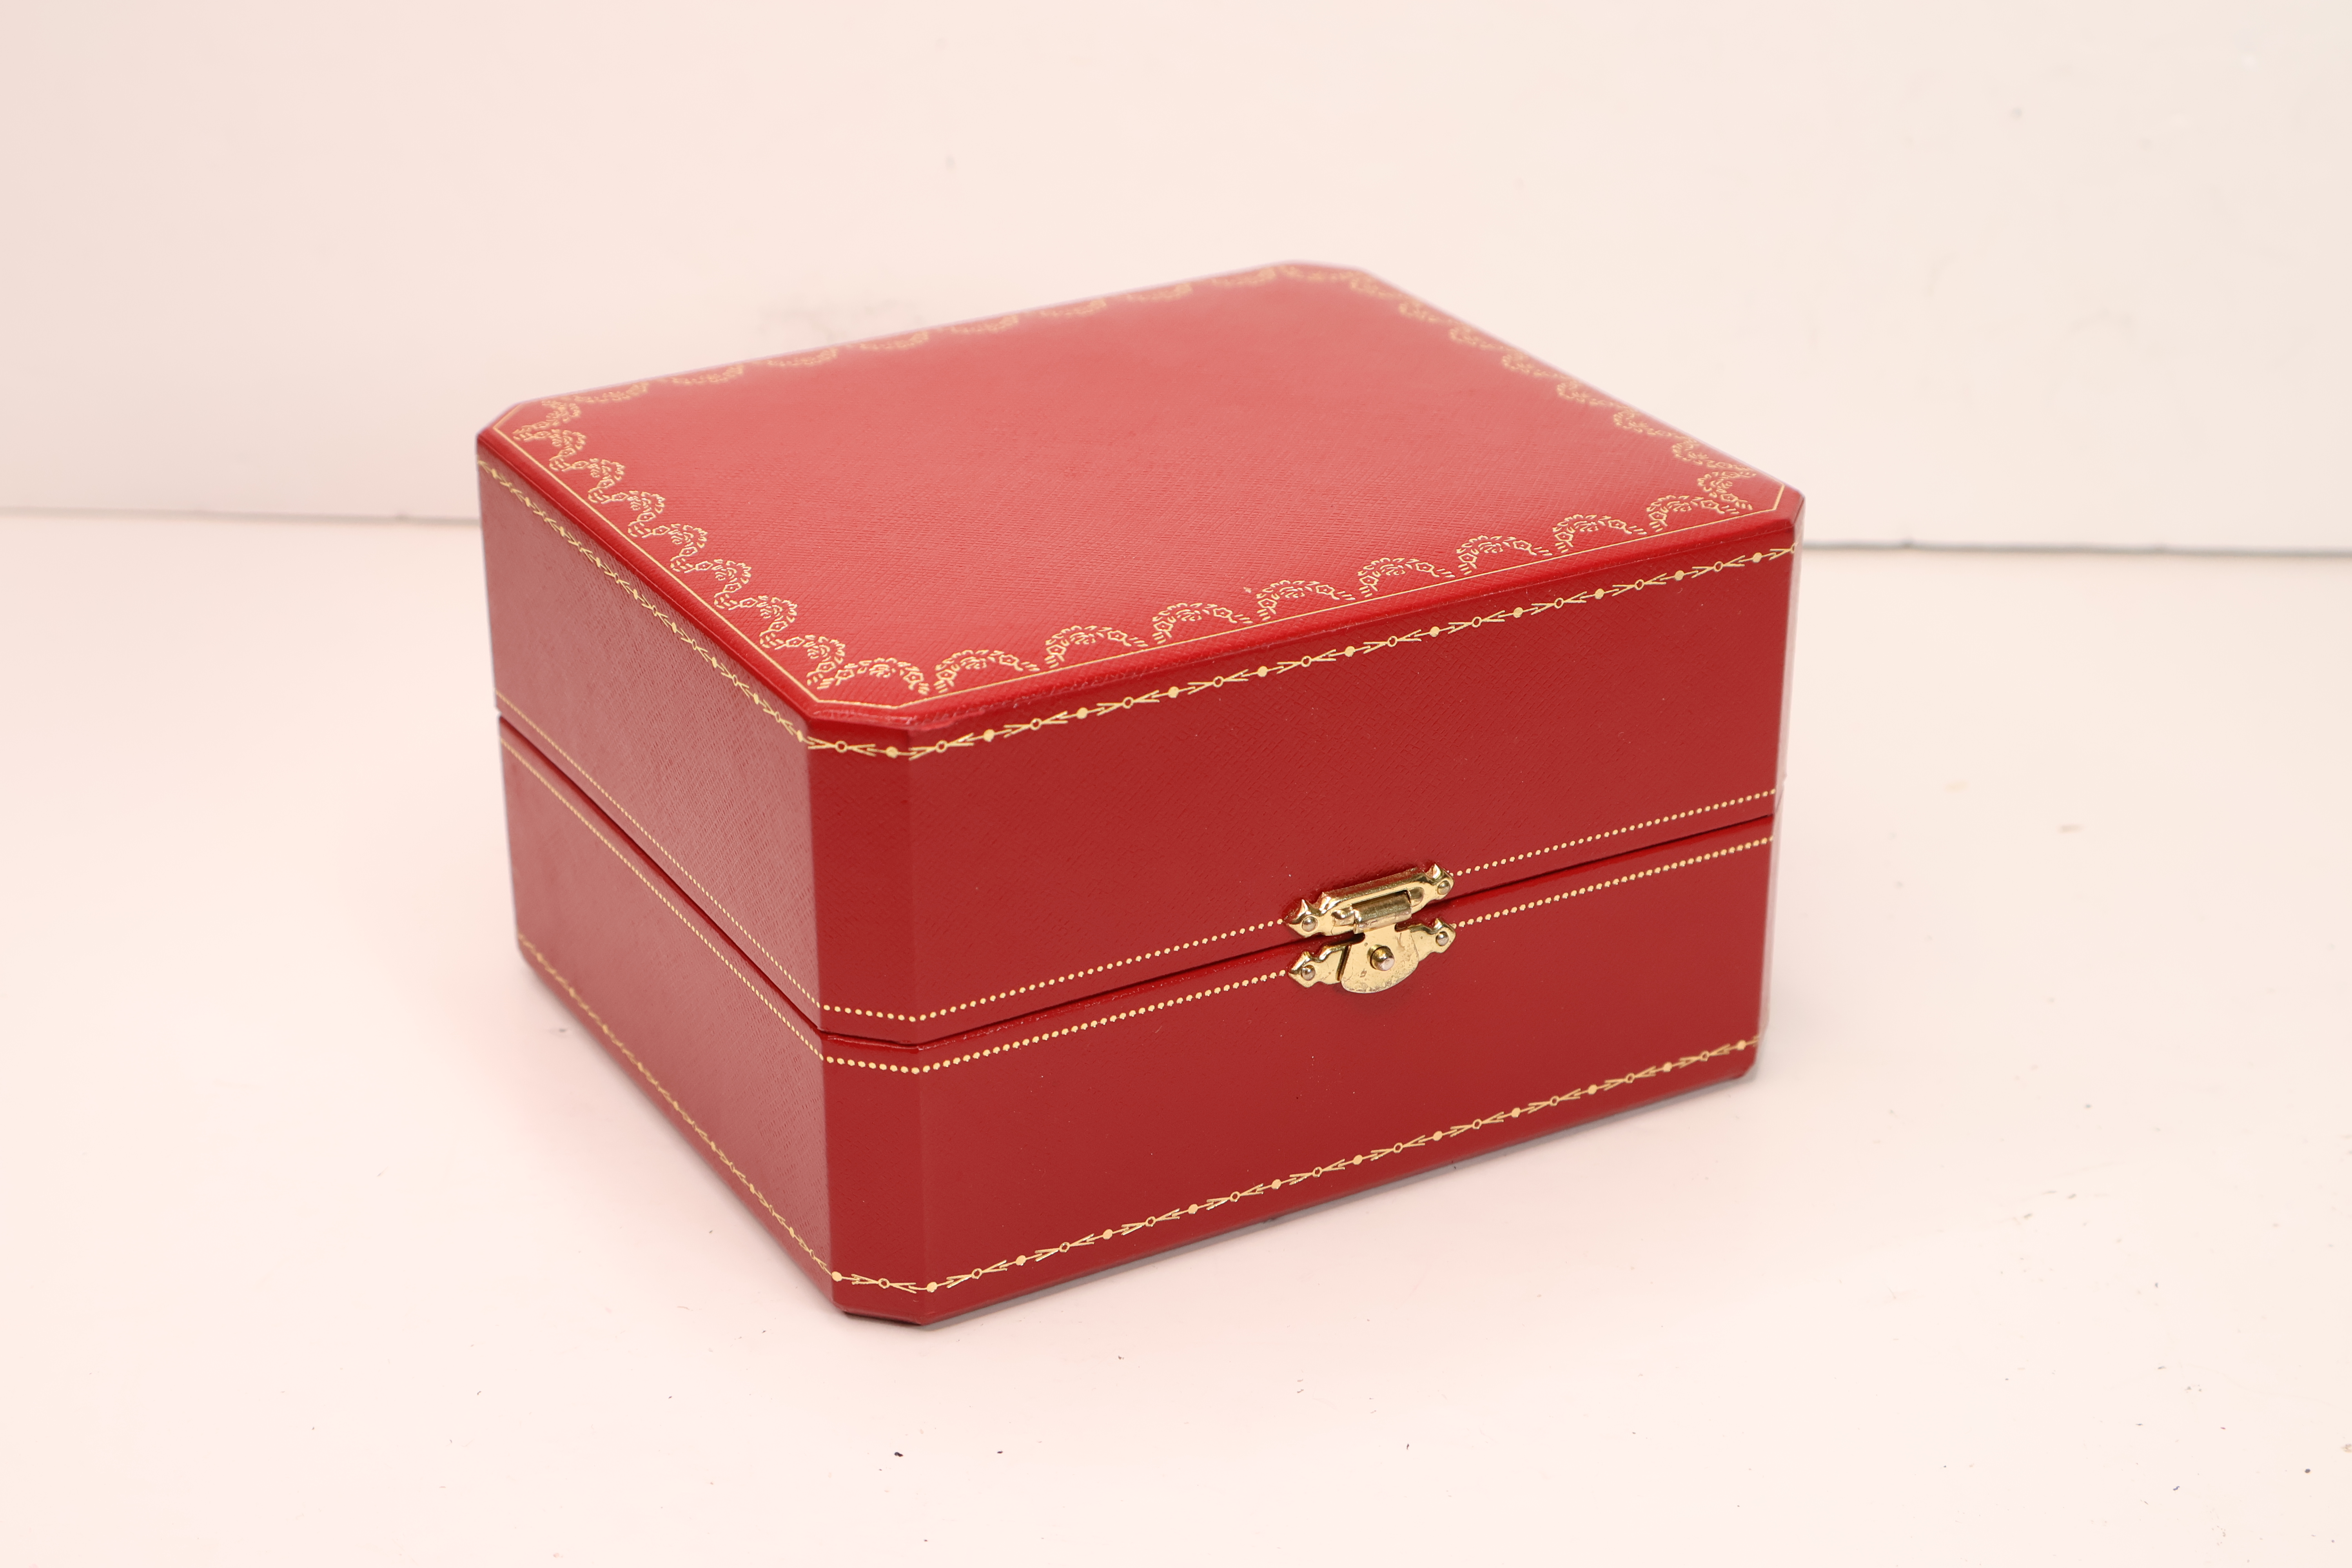 *To Be Sold Without Reserve* Cartier Watch Box - Image 2 of 2